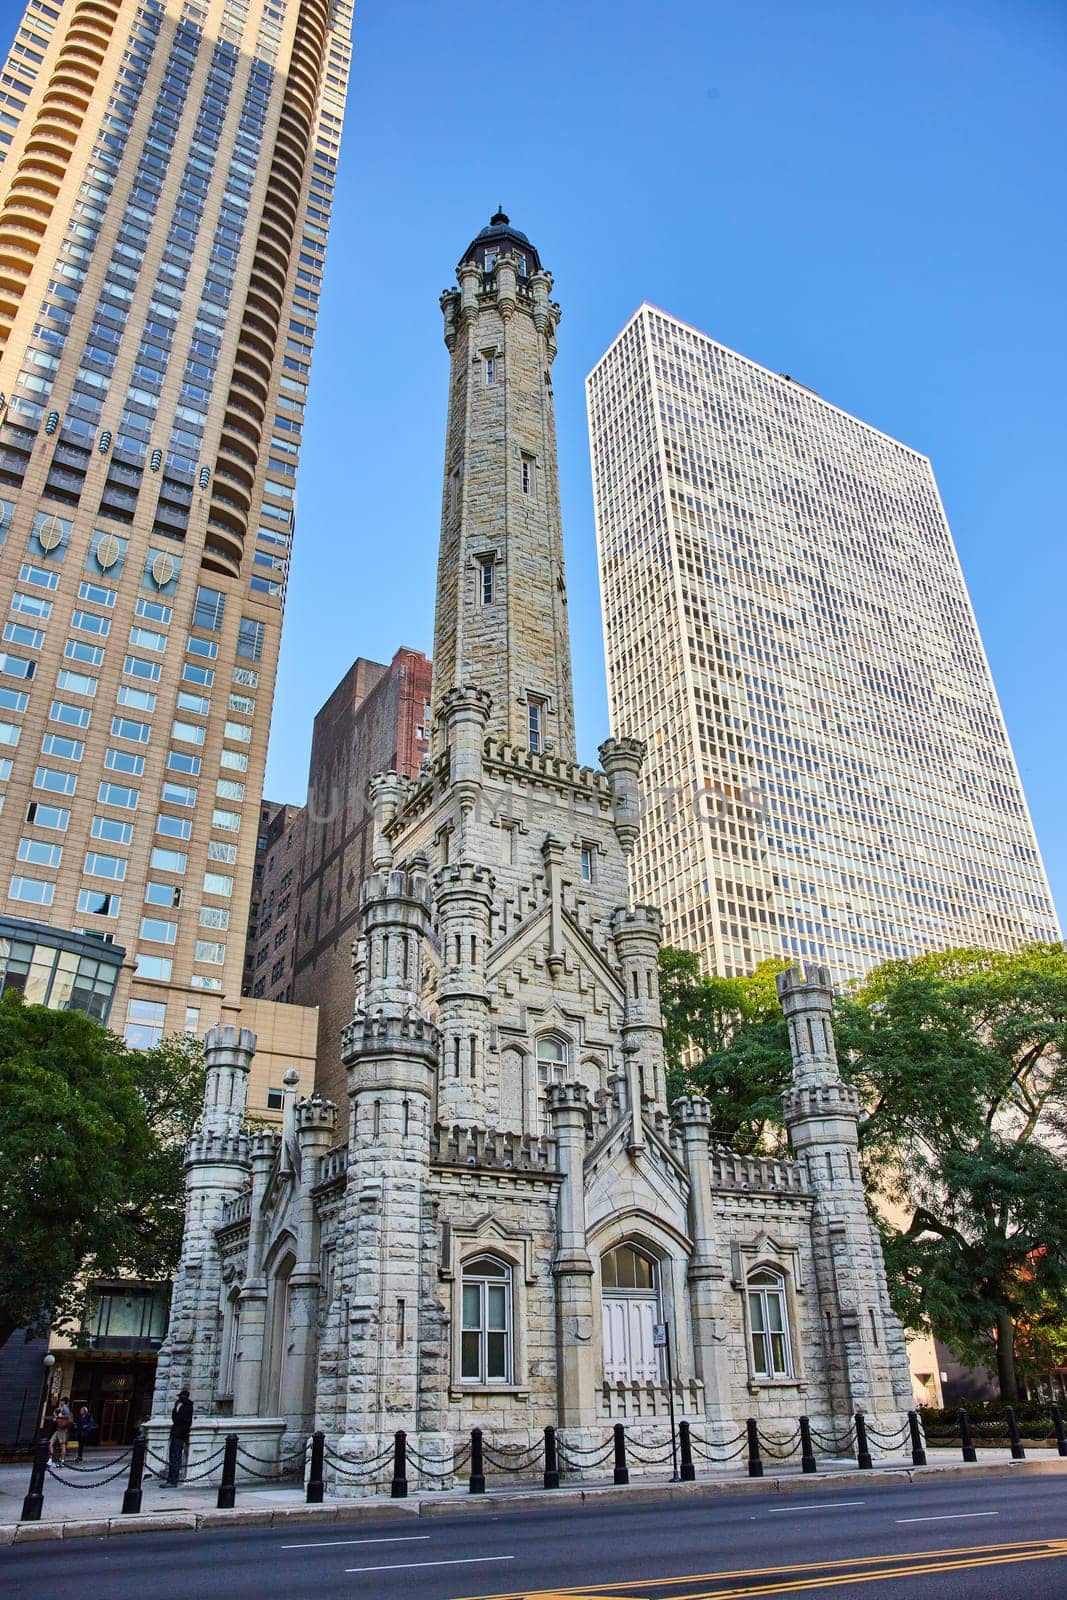 Bright castle architecture of old, historic, original Chicago water tower amid city skyscrapers by njproductions